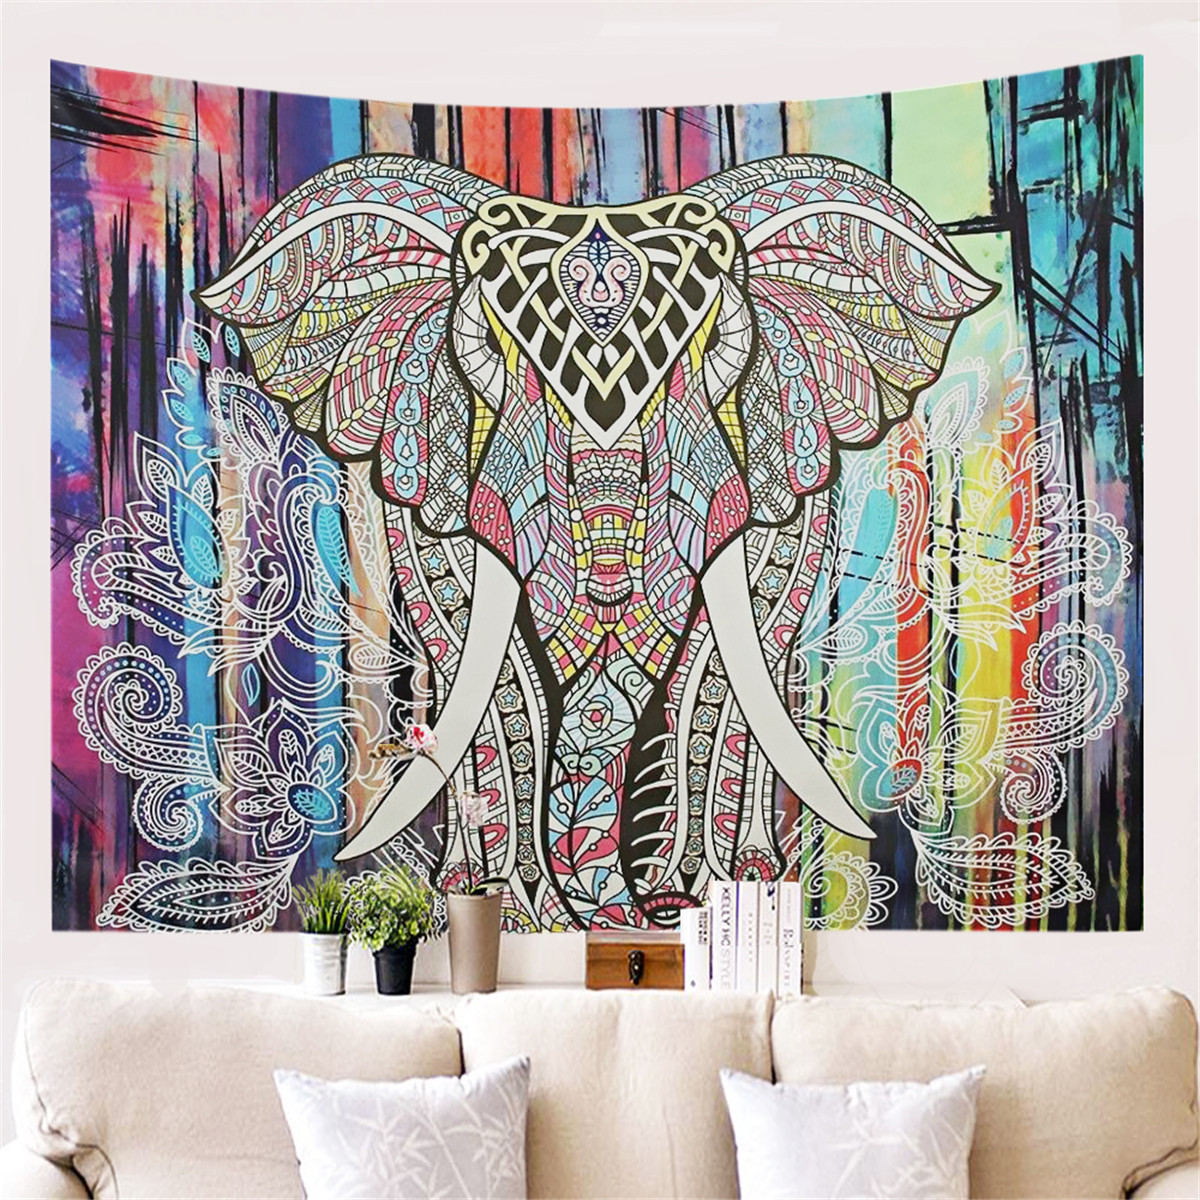 Colorful-Dye-Elephant-Tapestry-Wall-Hanging-Hippie-Tapestry-Colored-Printed-Decorative-Indian-Tapest-1751738-12